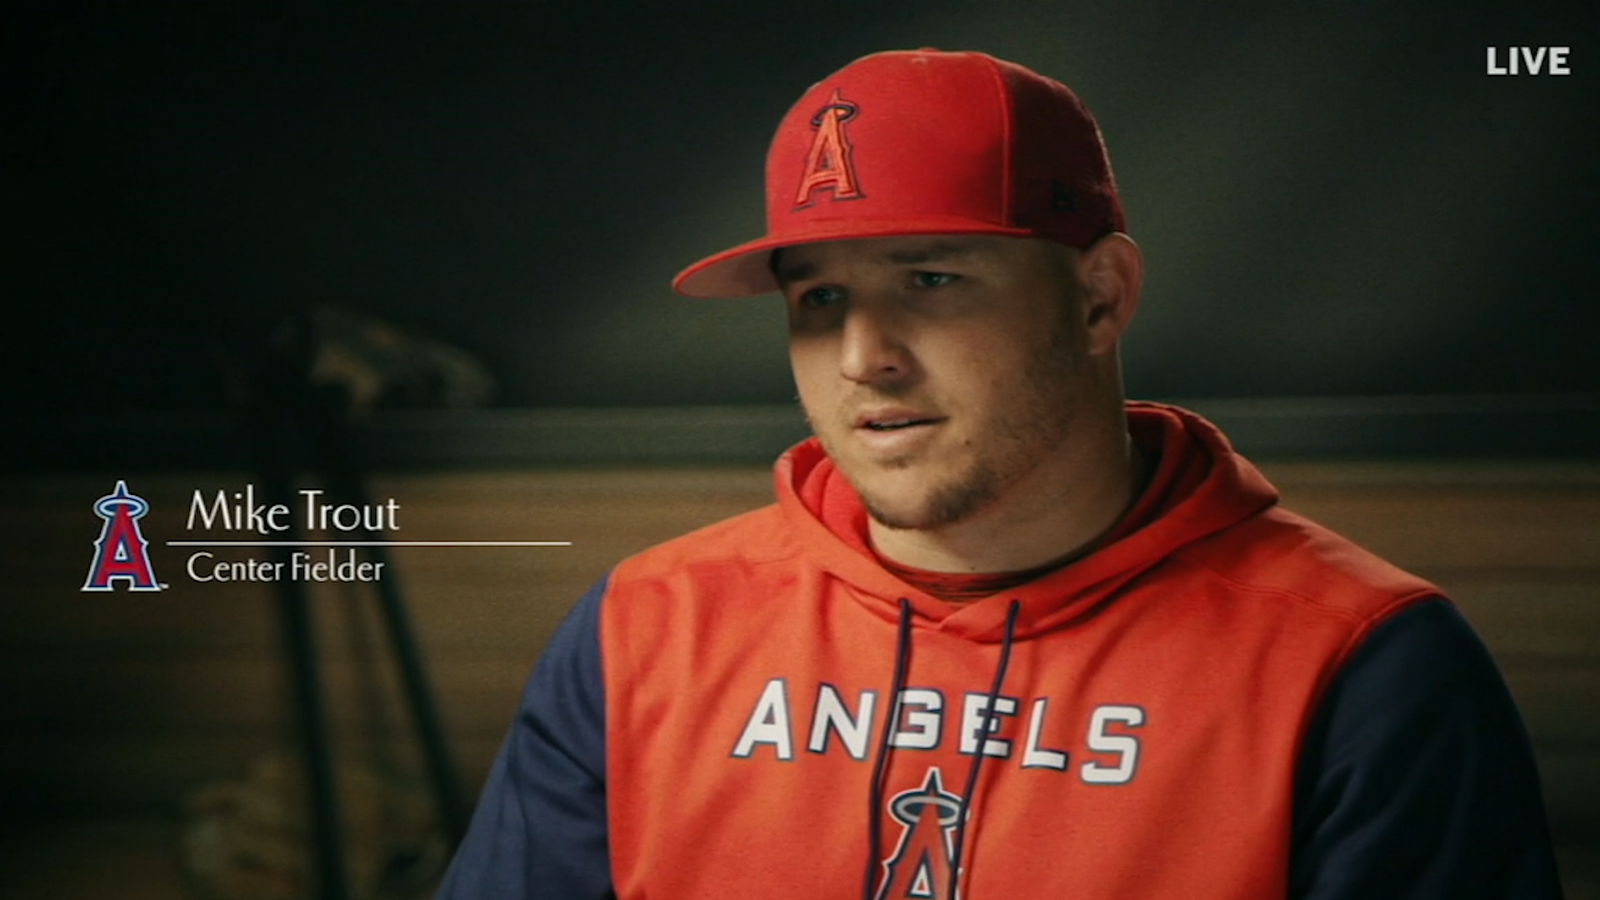 Mike Trout discusses his road to recovery, Angels' future